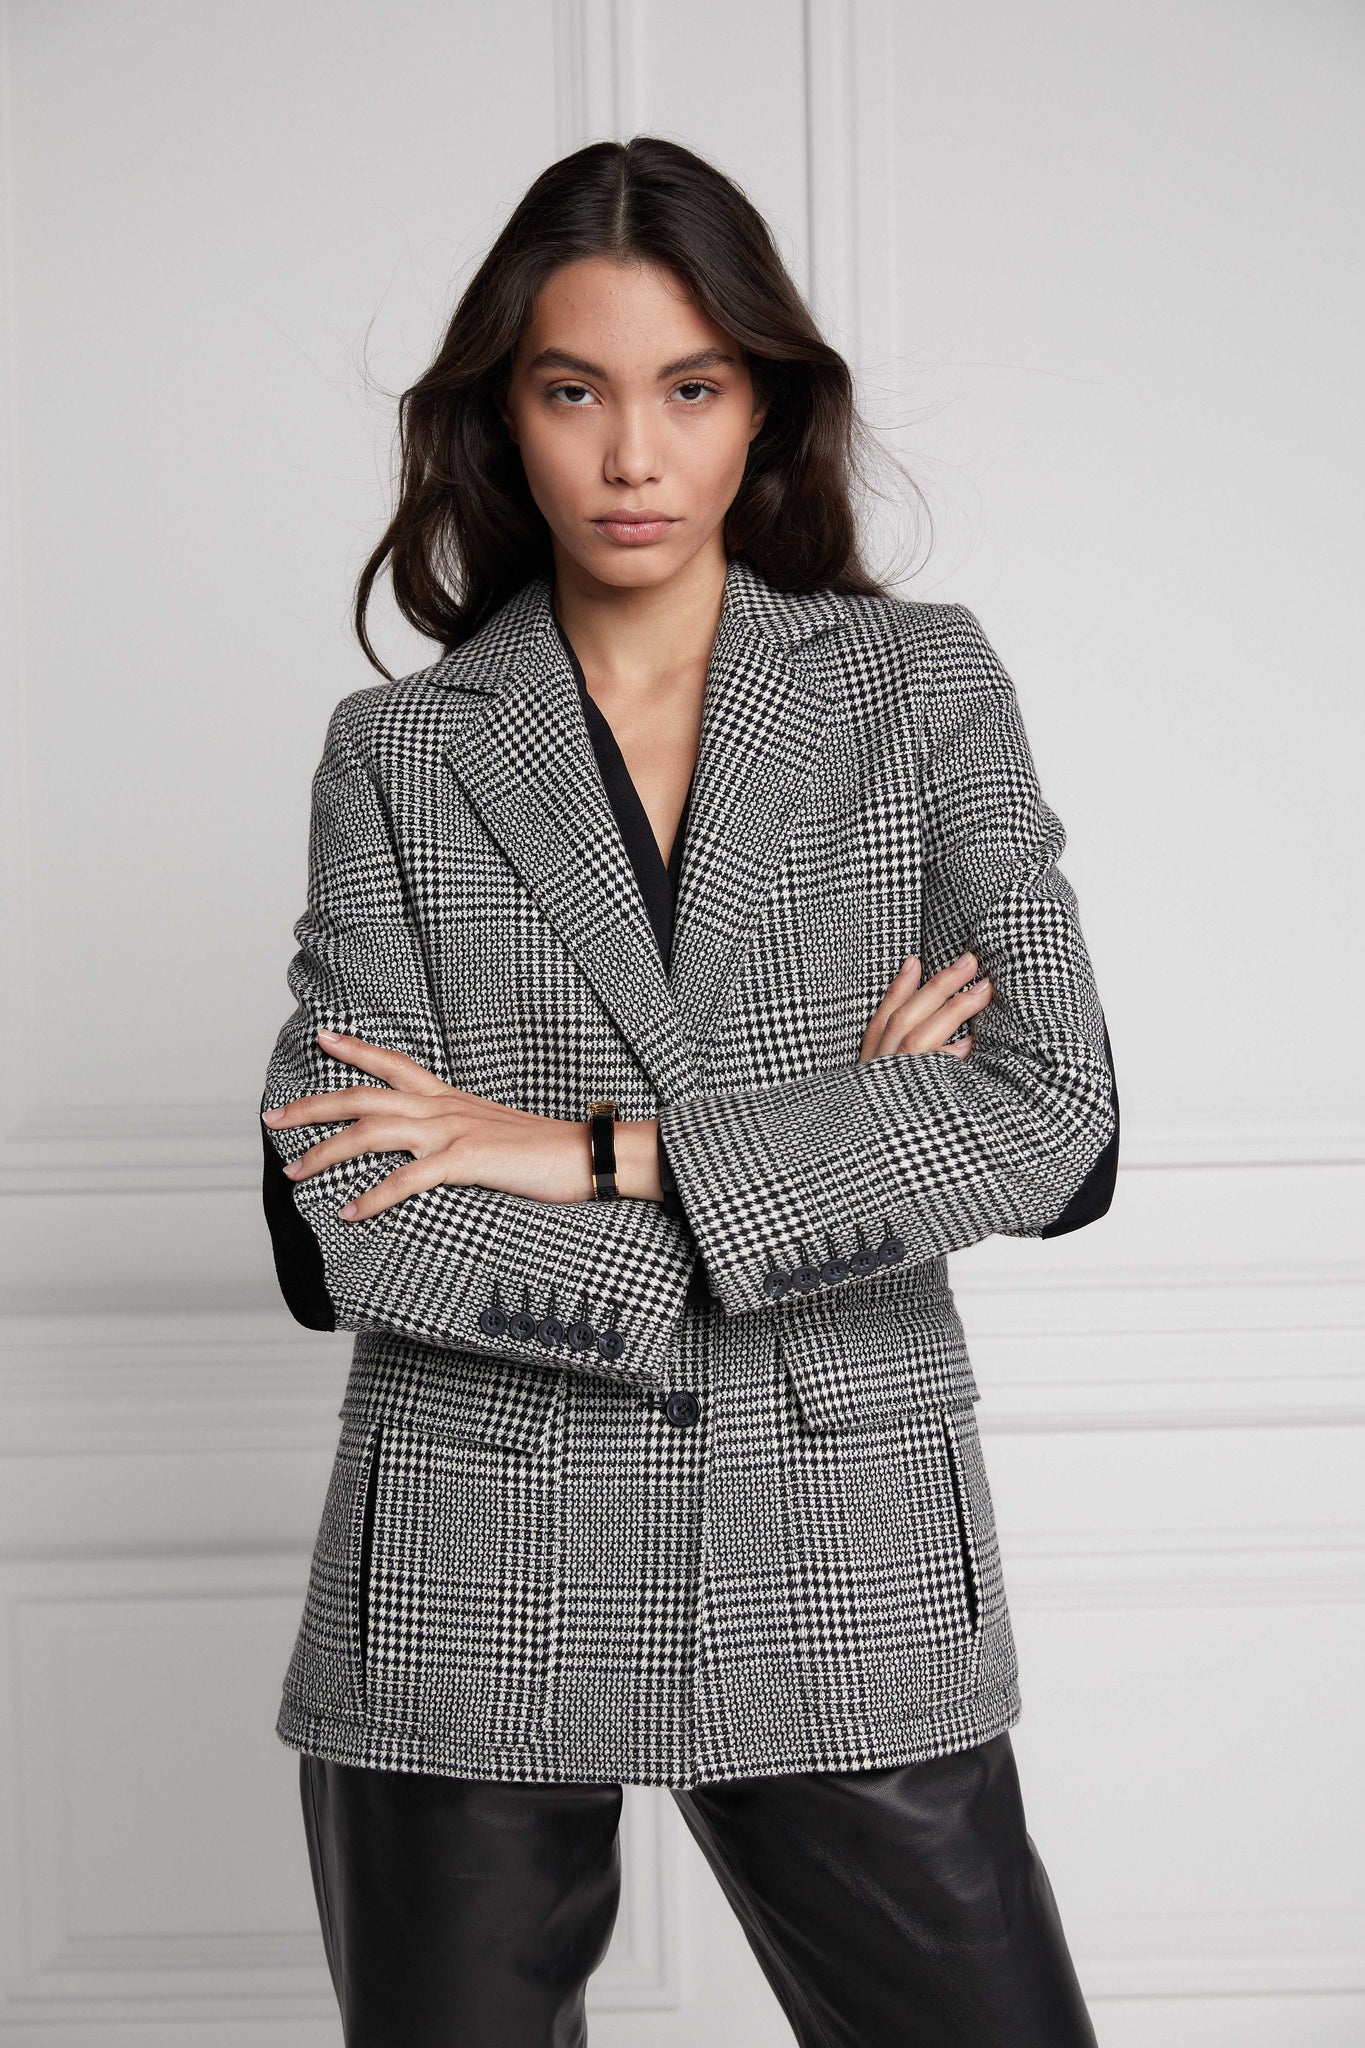 womens tailored fit single breasted blazer in black and white check with patch pockets and contrast black suede elbow patches and underside collar